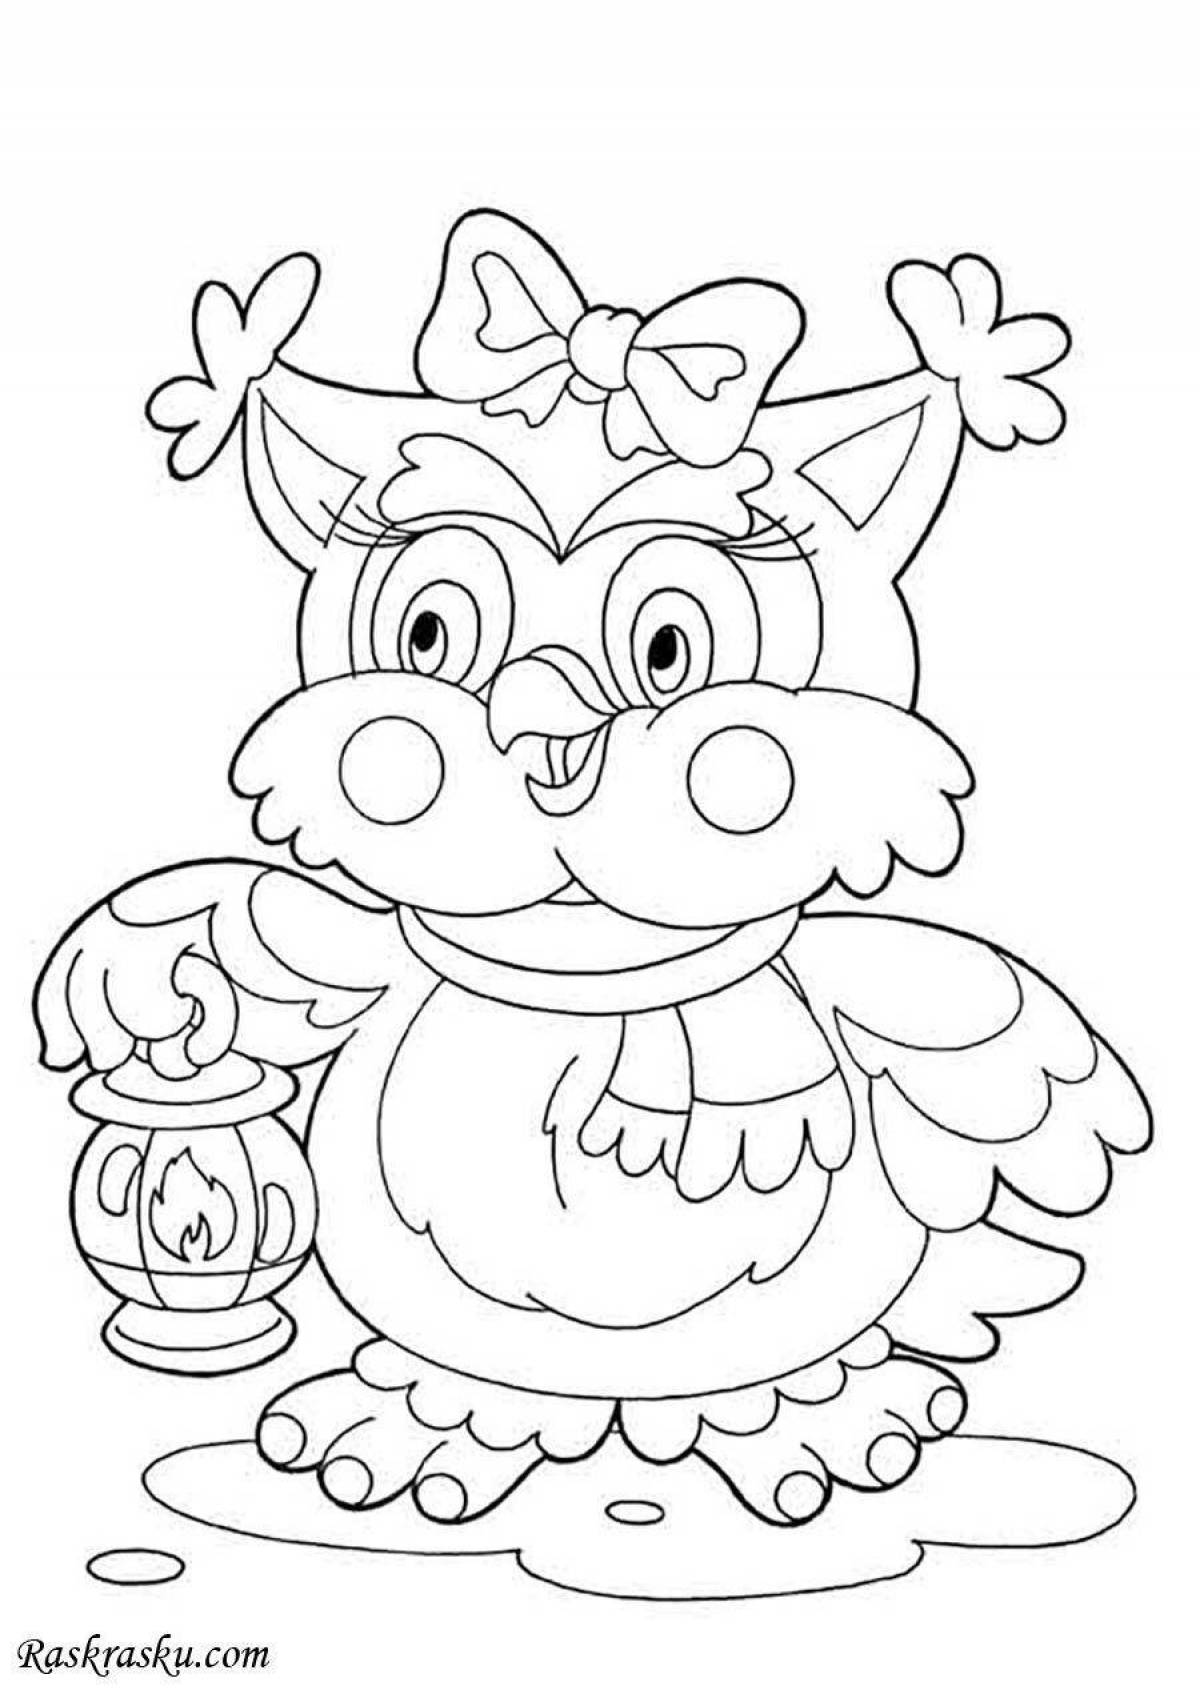 Cute little animal coloring pages